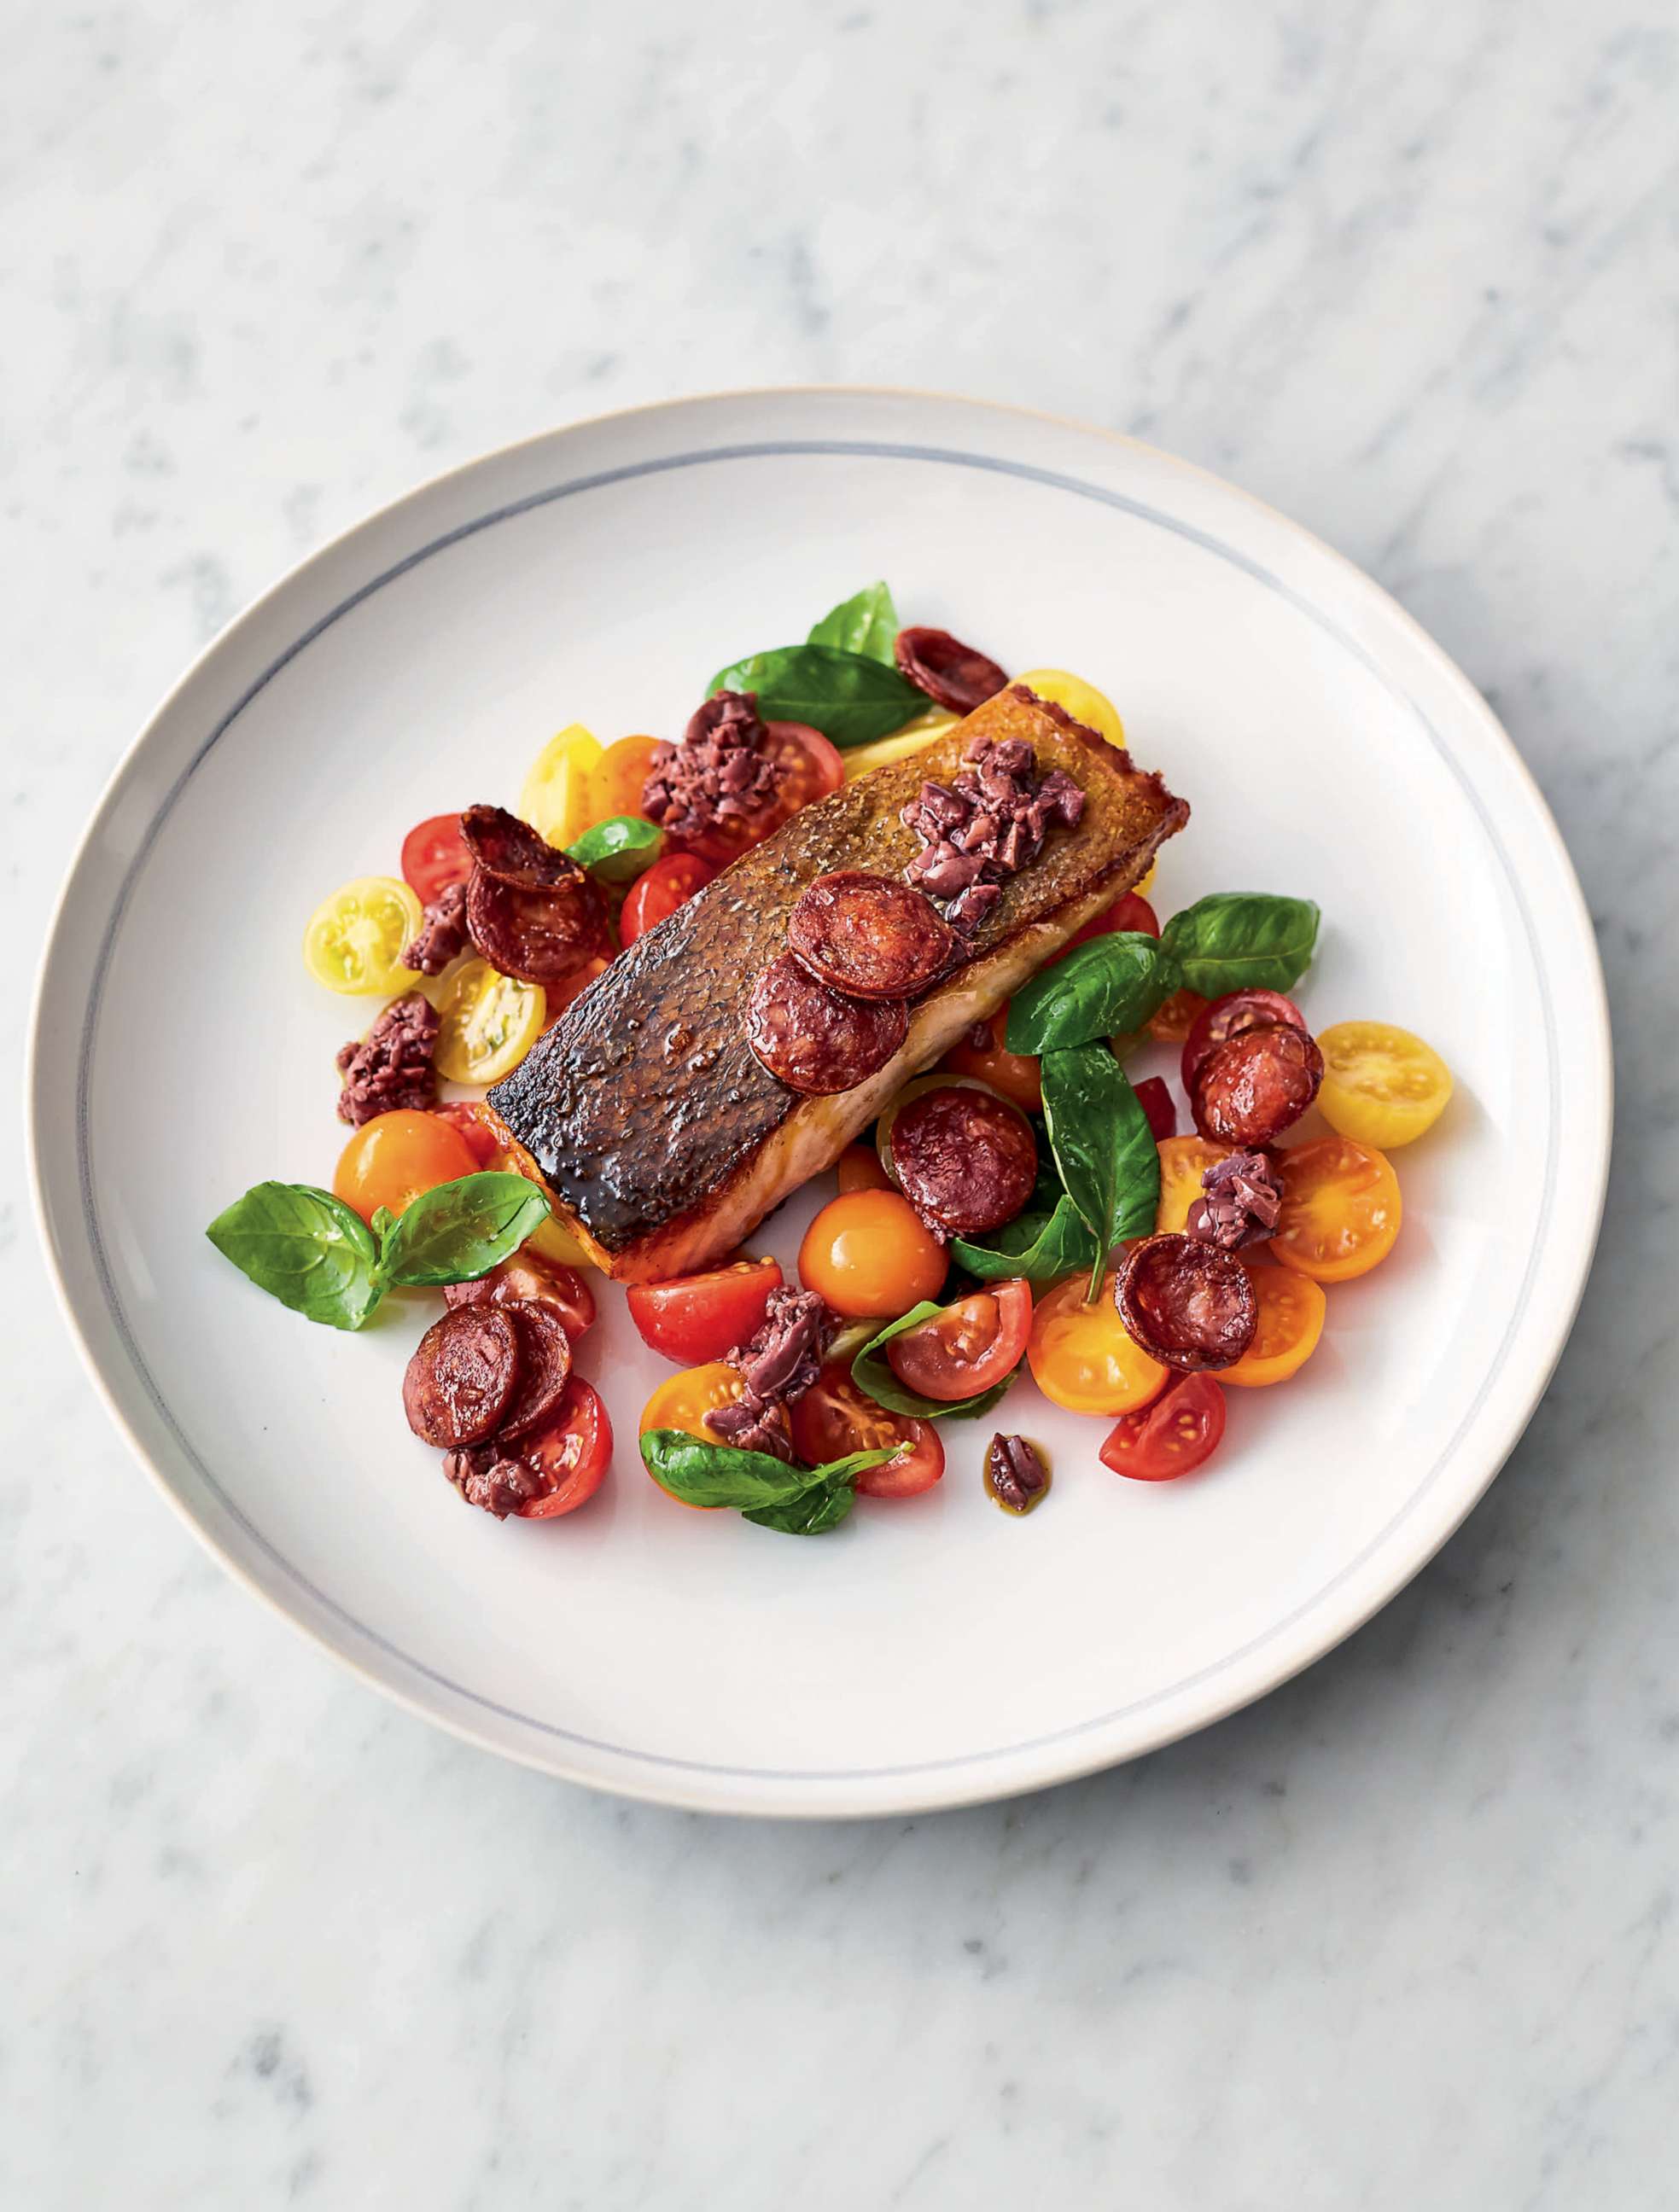 PHOTO: Jamie Oliver shares a recipe from his new cookbook for smoky chorizo salmon.